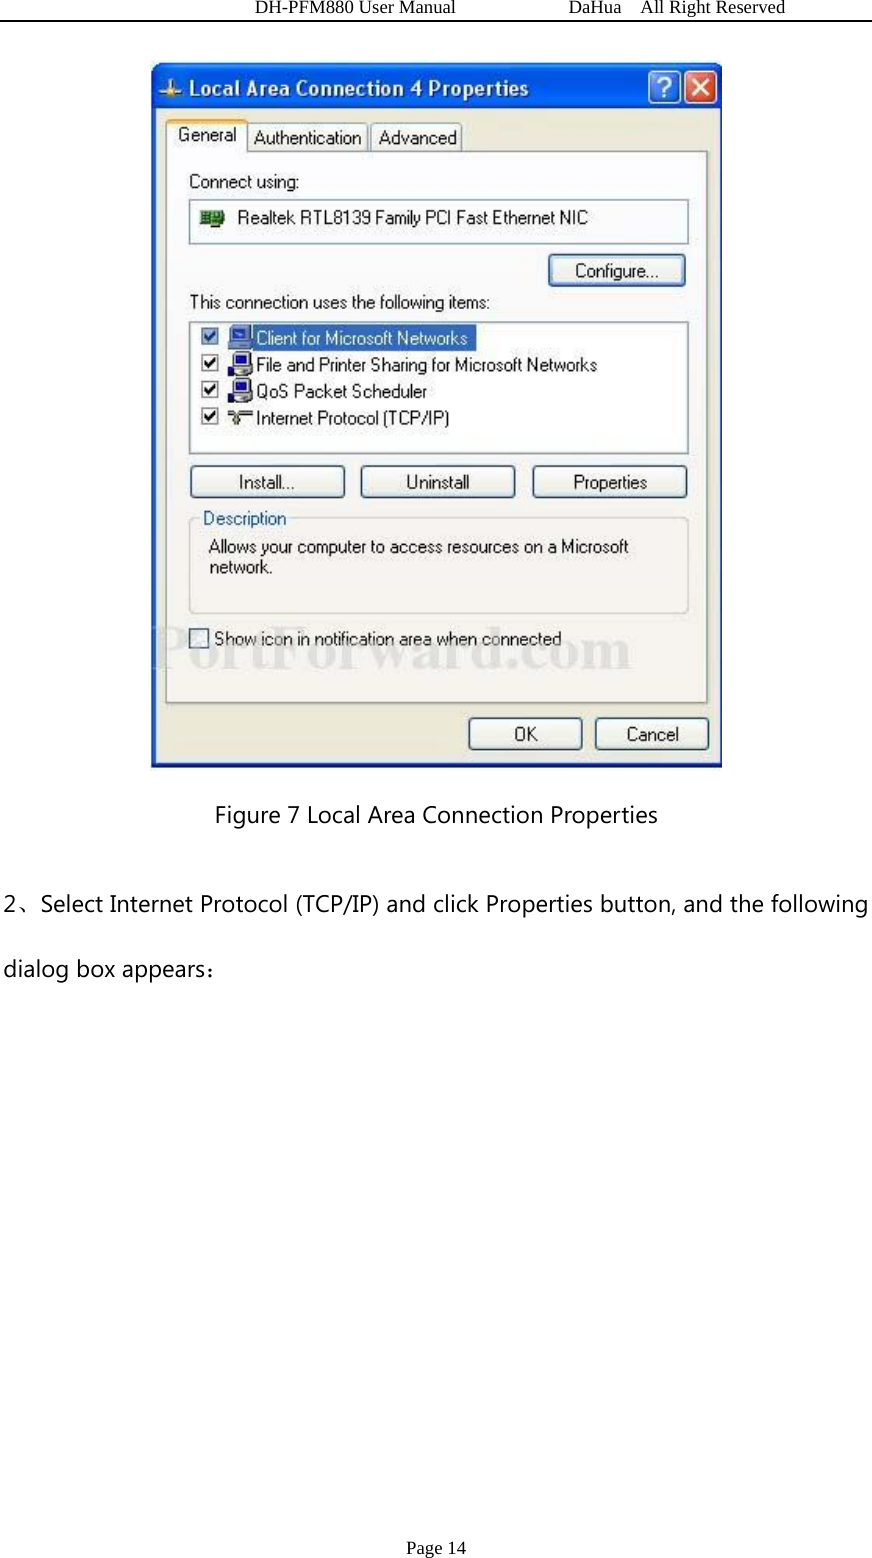   DH-PFM880 User Manual            DaHua  All Right Reserved Page 14  Figure 7 Local Area Connection Properties 2、Select Internet Protocol (TCP/IP) and click Properties button, and the following dialog box appears： 